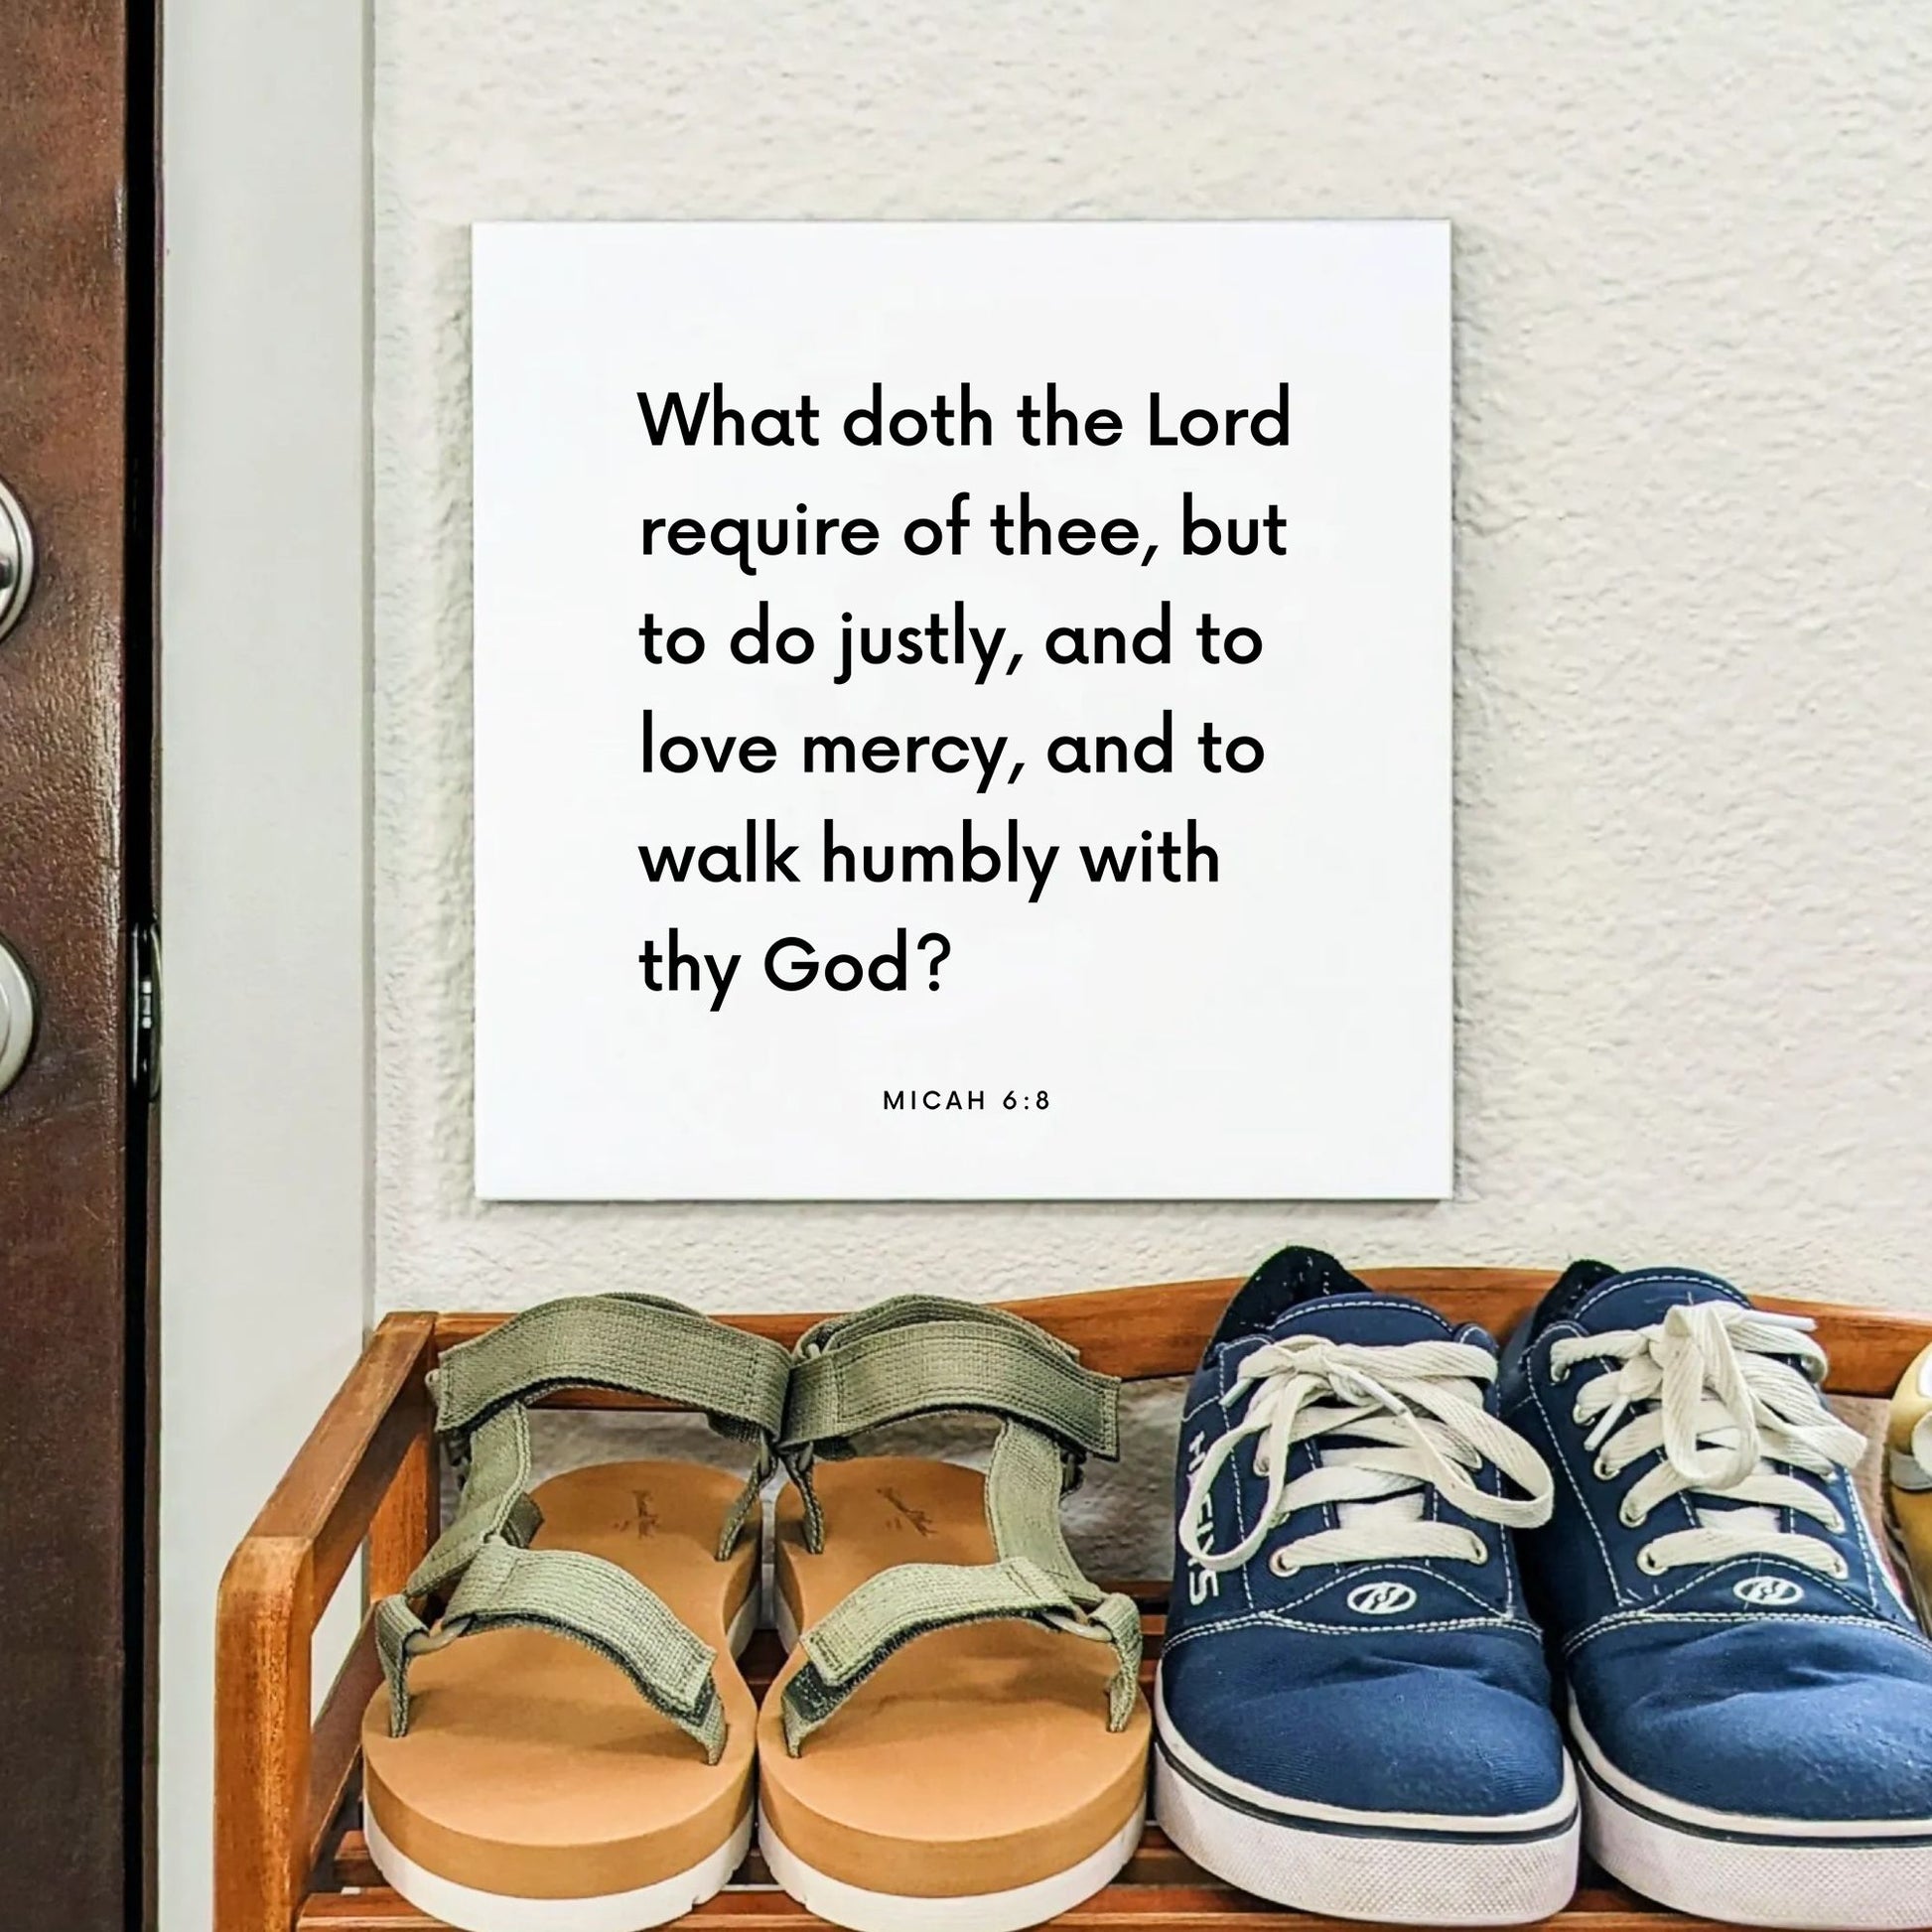 Shoes mouting of the scripture tile for Micah 6:8 - "What doth the Lord require of thee?"